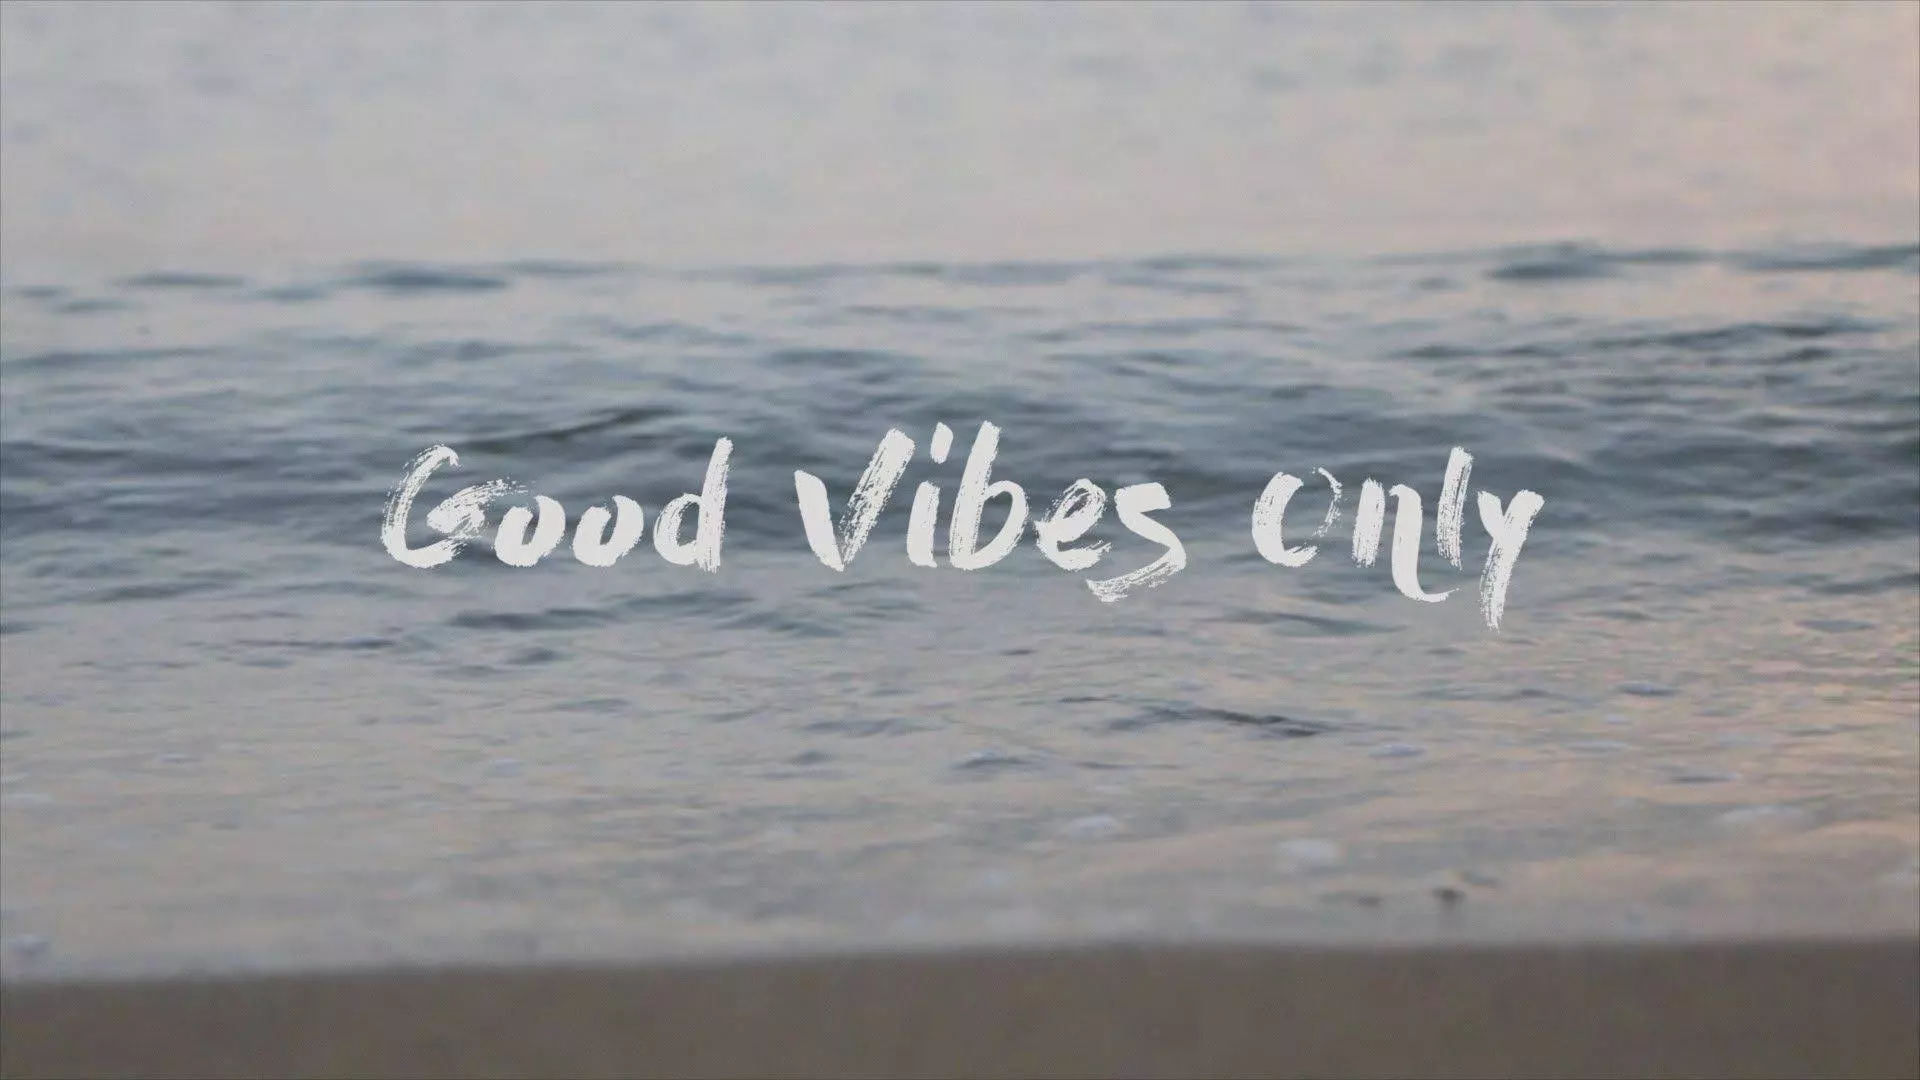 Good vibes only. - Positive